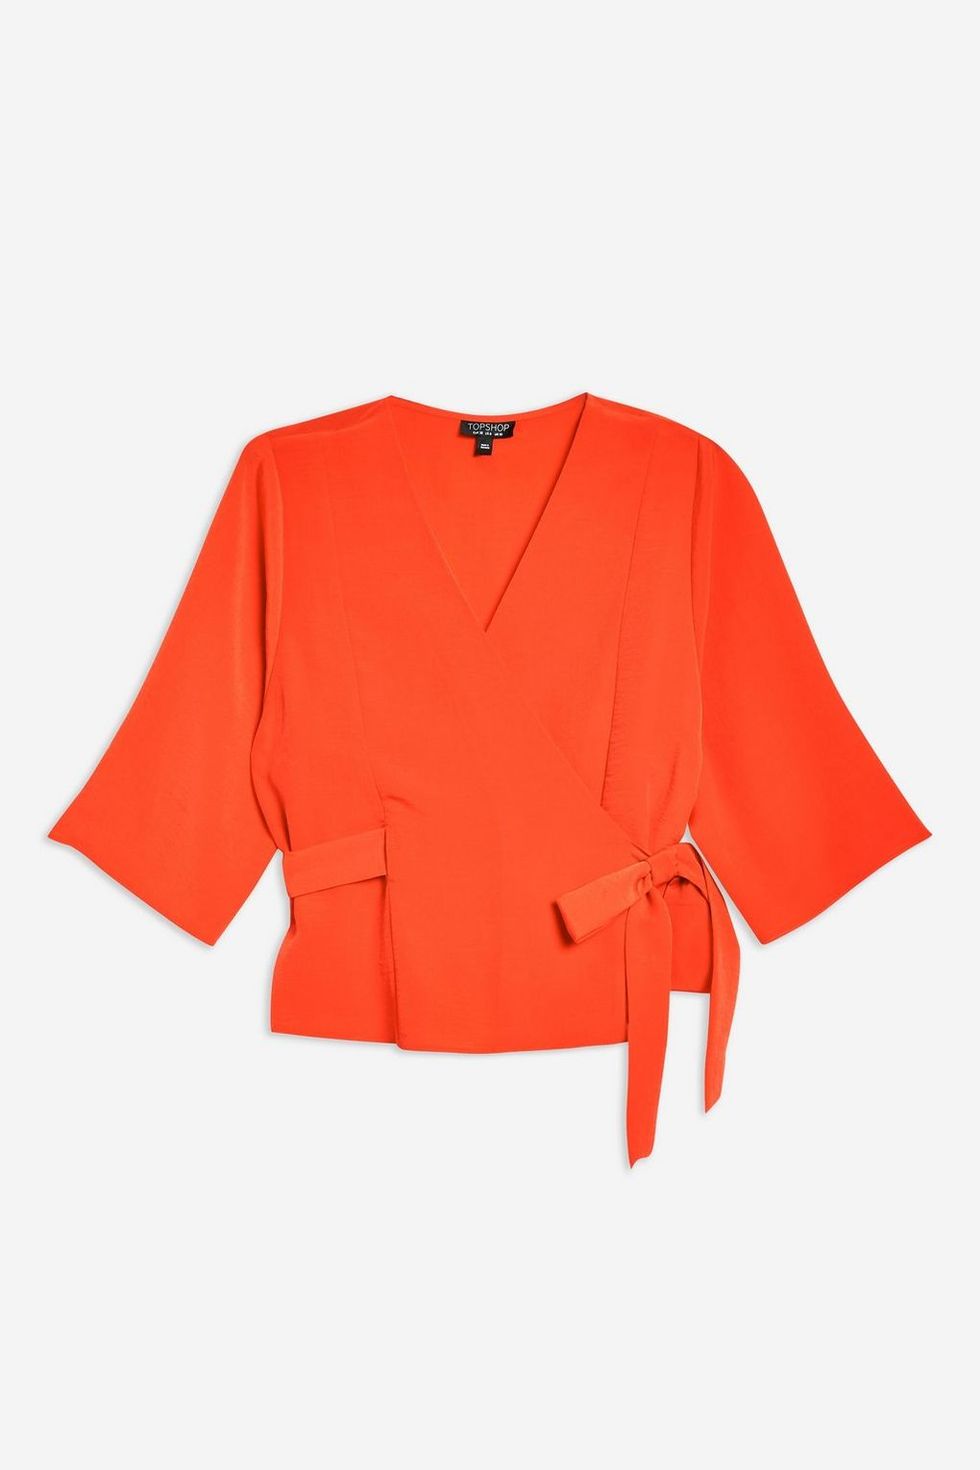 Clothing, Red, Orange, Outerwear, Sleeve, Blouse, Crop top, Jacket, Costume, Top, 